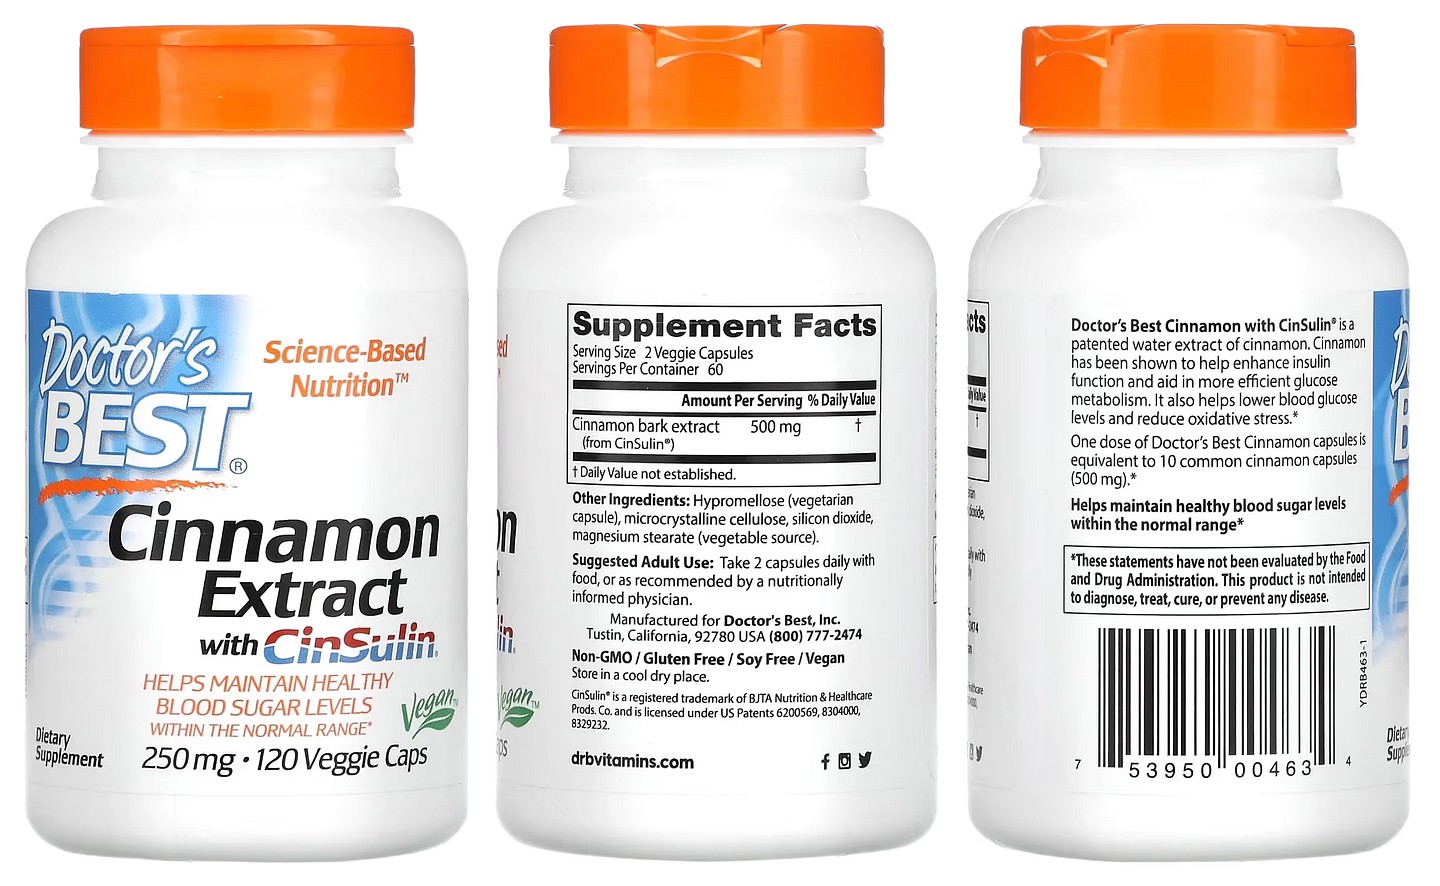 Doctor's Best, Cinnamon Extract with CinSulin packaging